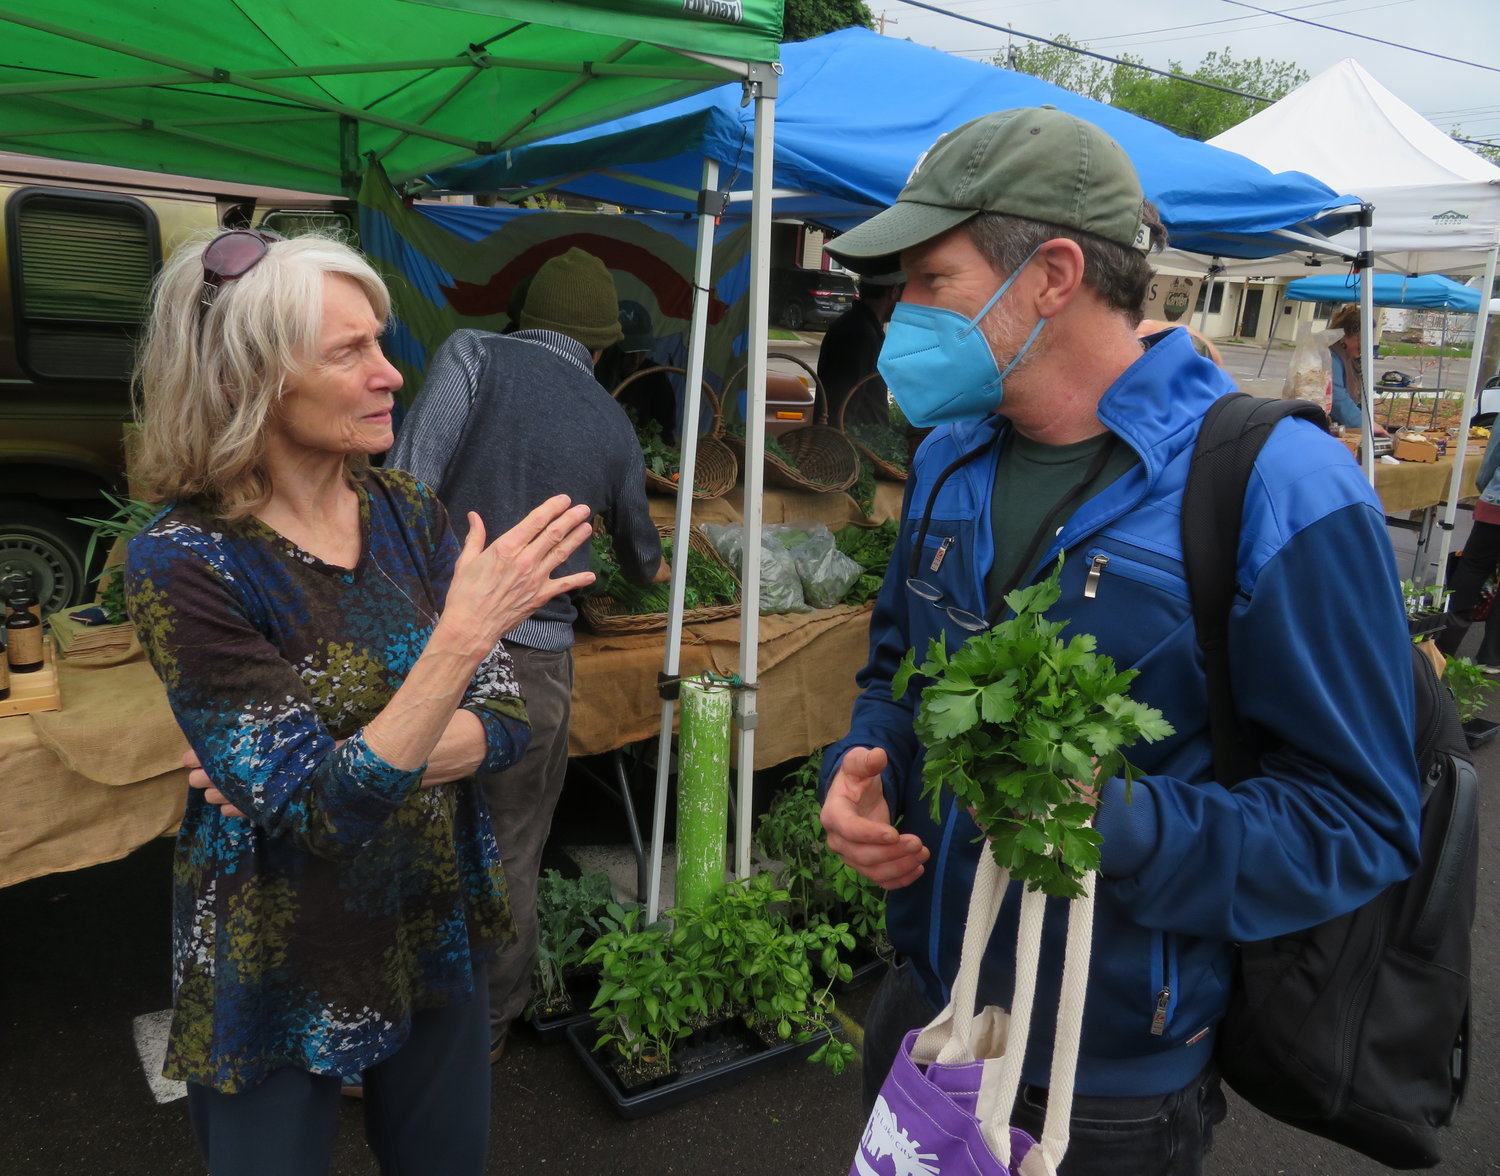 Joan Nelson huddled with East Lansing Food Co-op President Stephen Gasteyer at Wednesday's Allen Farmers Market to plan ELFCO's imminent move into Allen Place this summer.